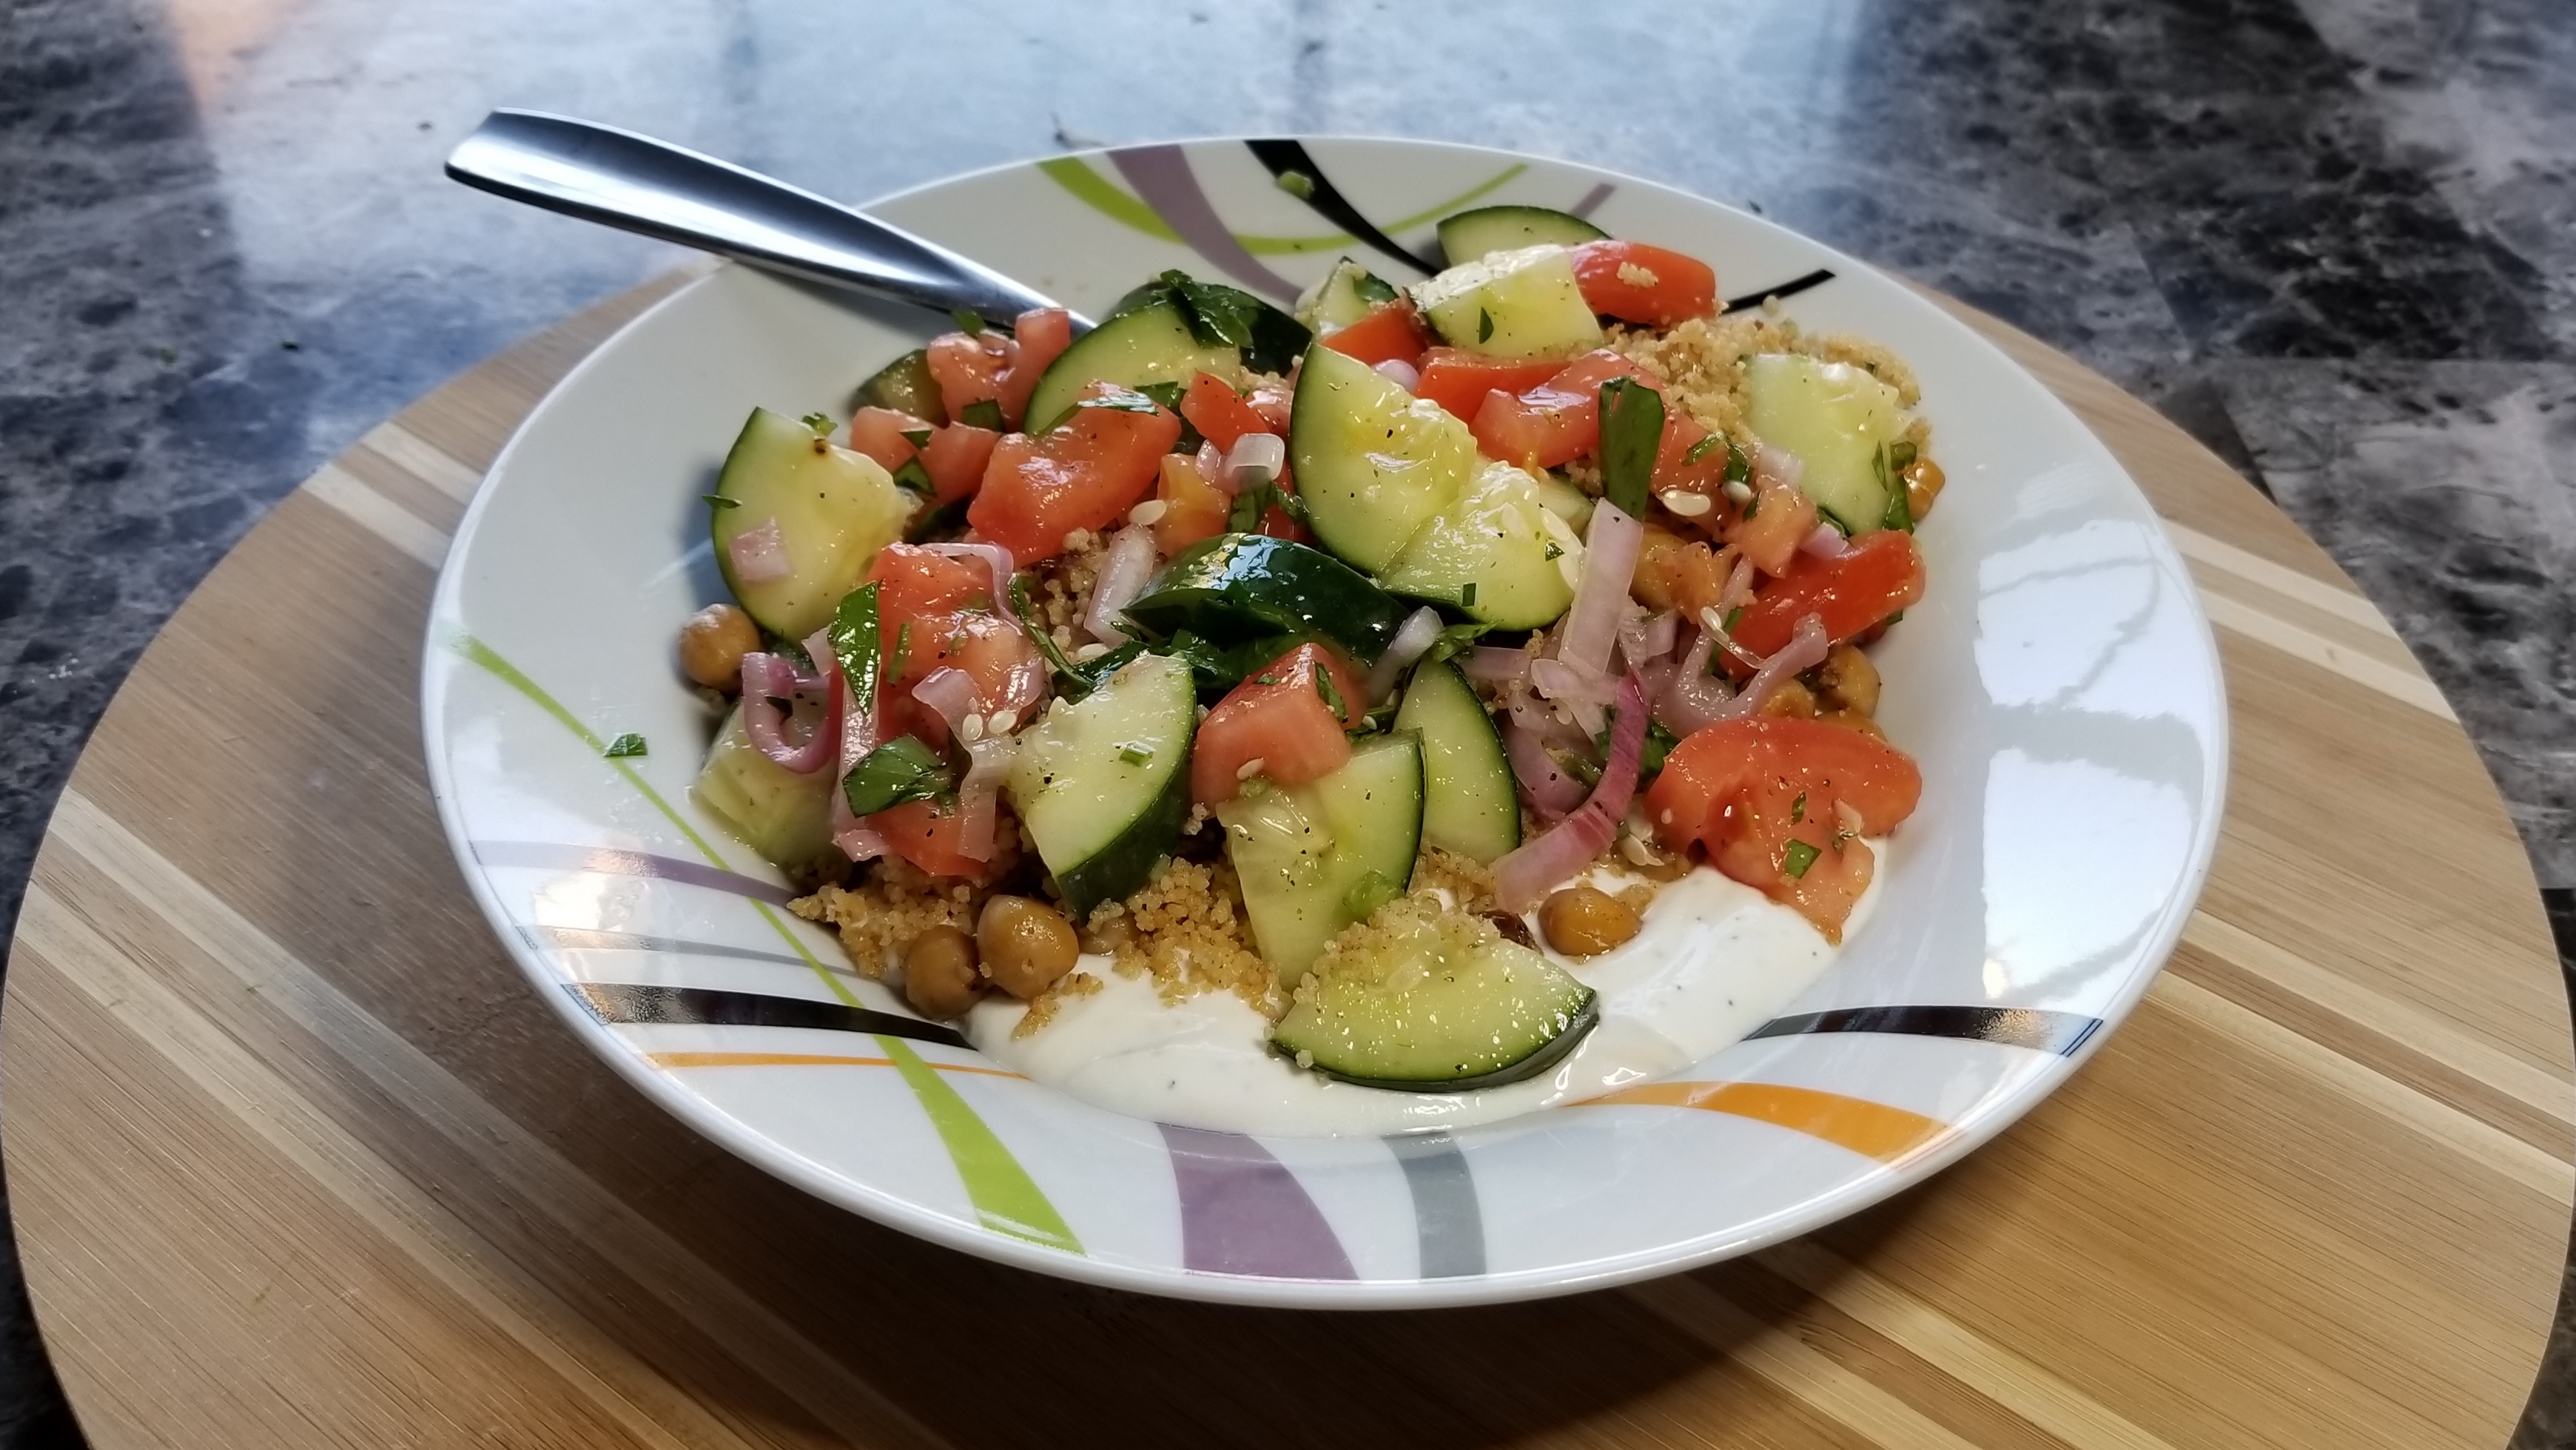 Spiced Chickpeas & Couscous Recipe with Turkish salad